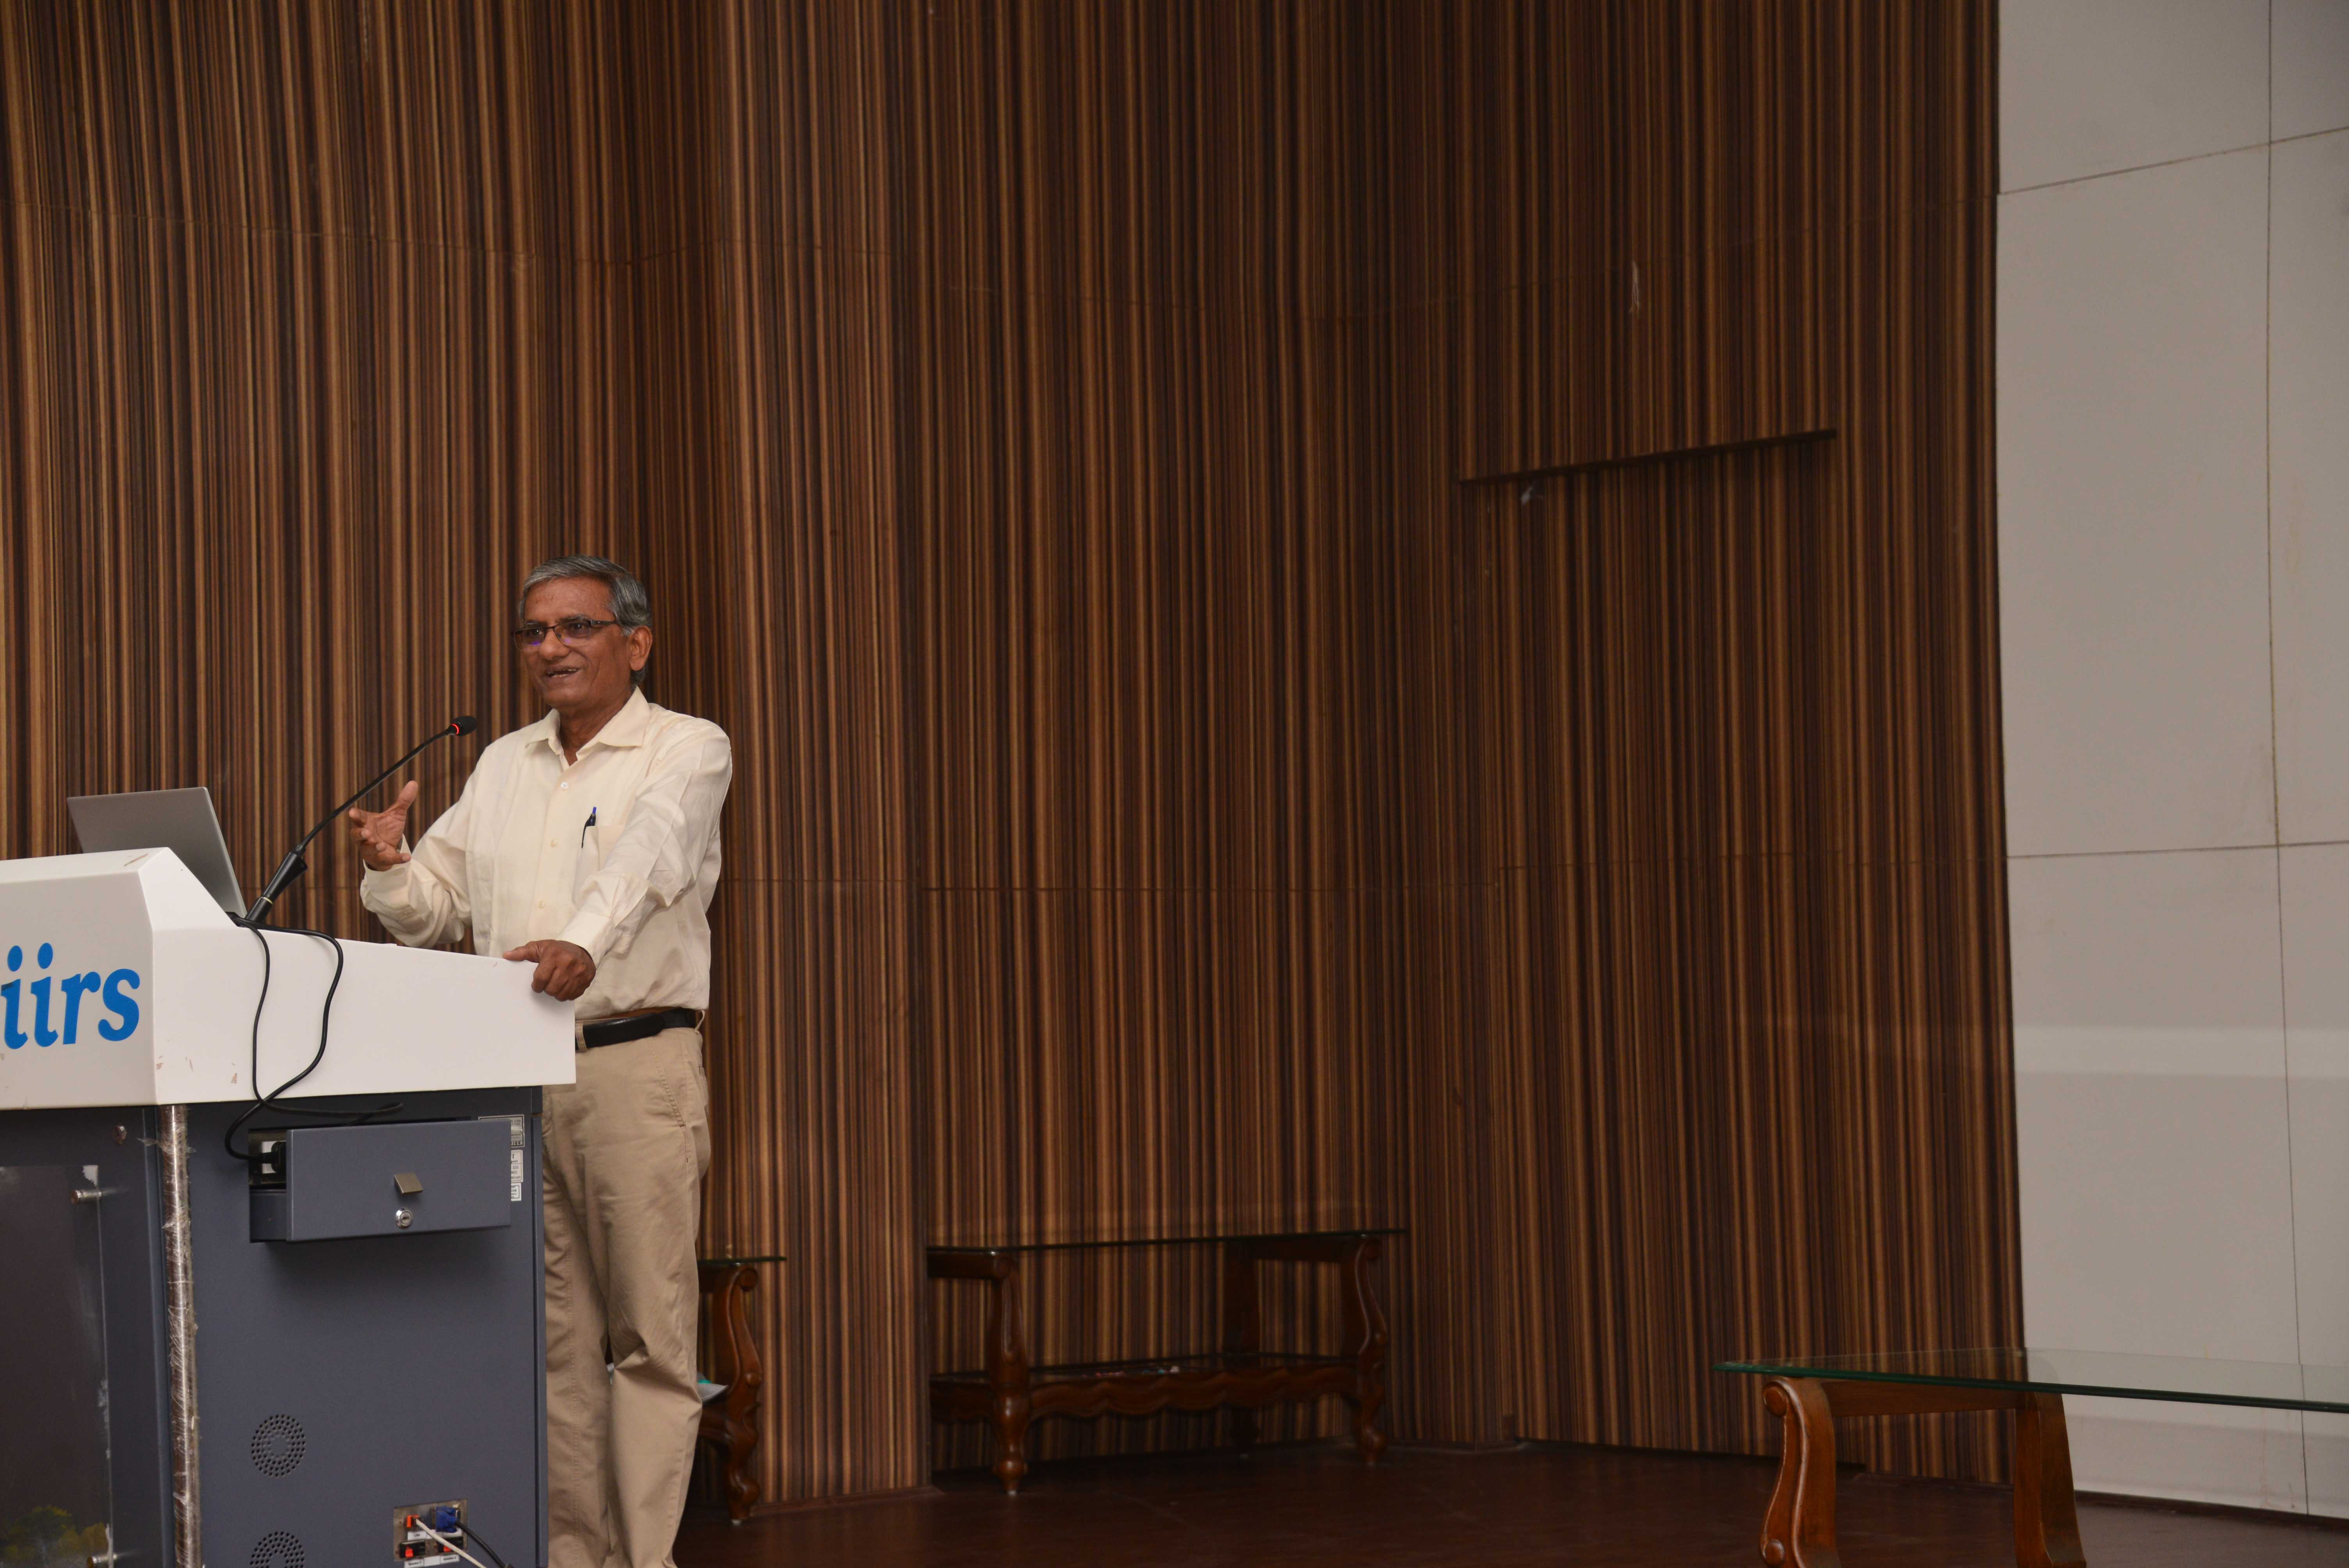 Visit of Dr. P.S. Roy at IIRS and Interaction with the scientists and students of IIRS